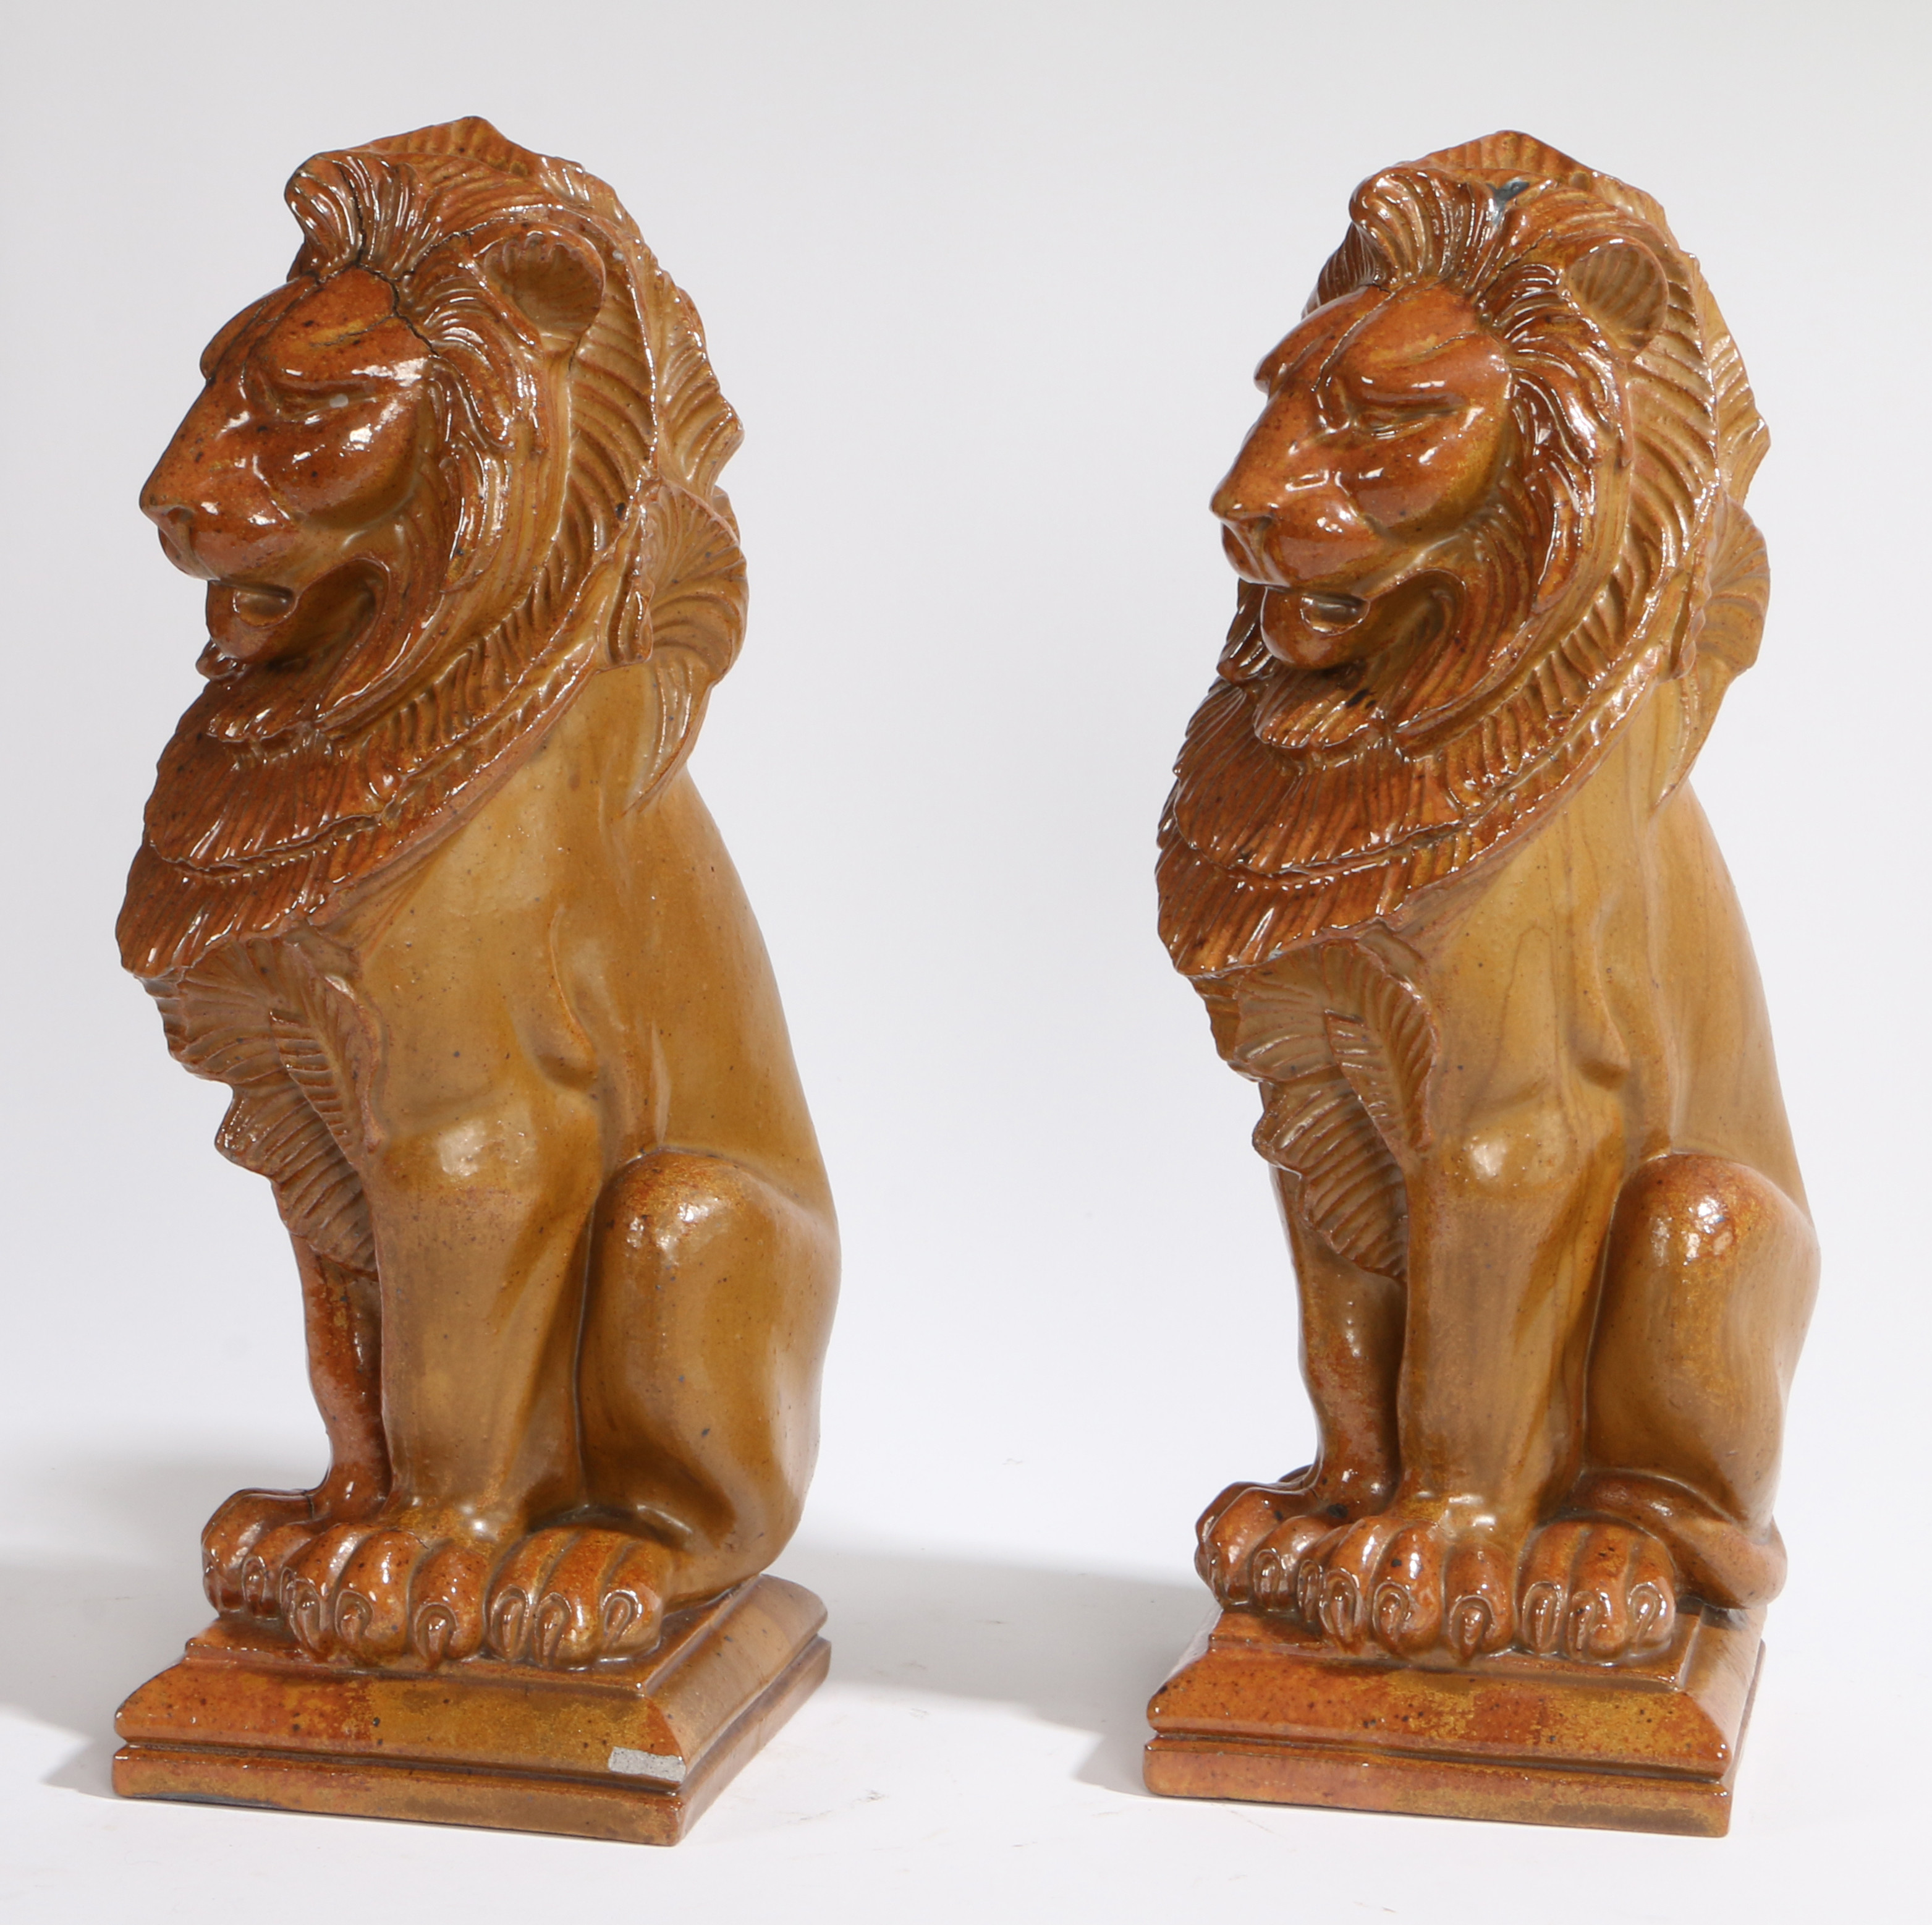 ALFRED G HOPKINS (1884-1940), A PAIR OF SALT GLAZED STONEWARE LIONS. - Image 3 of 4